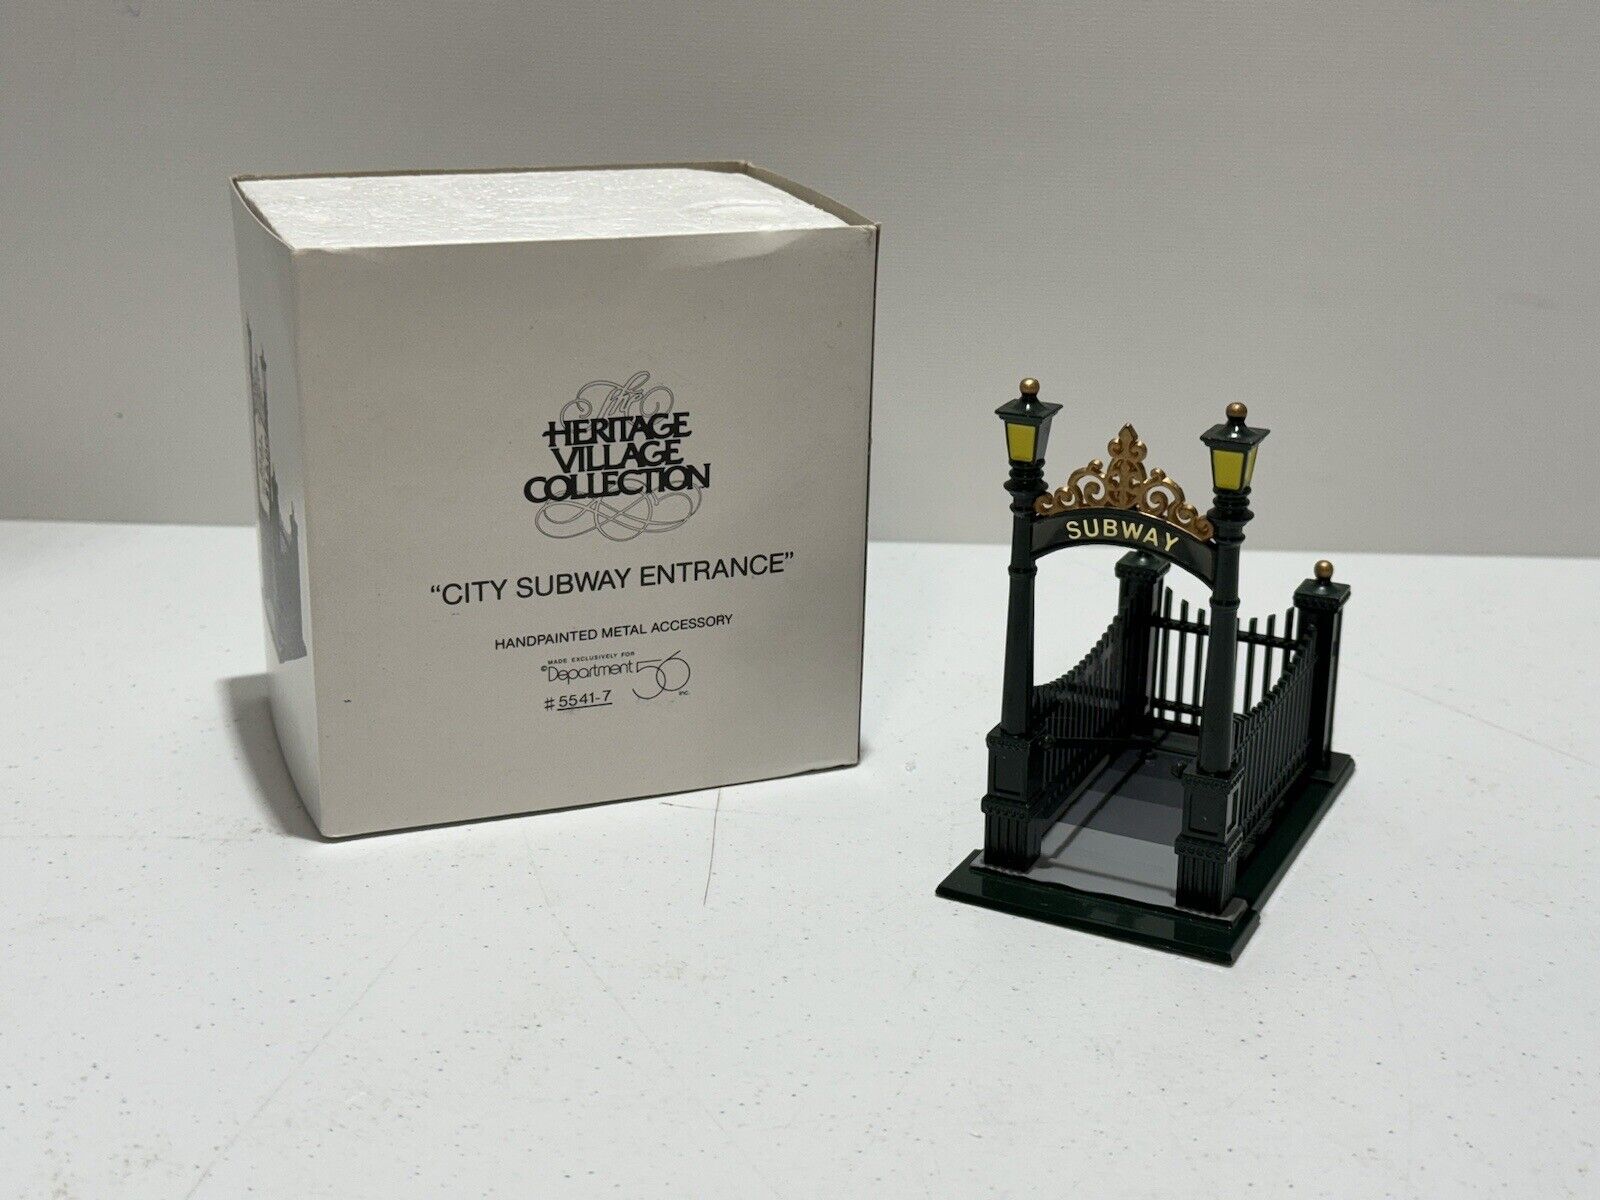 Retired Department 56 City Subway Entrance Heritage Village Collection #5541-7